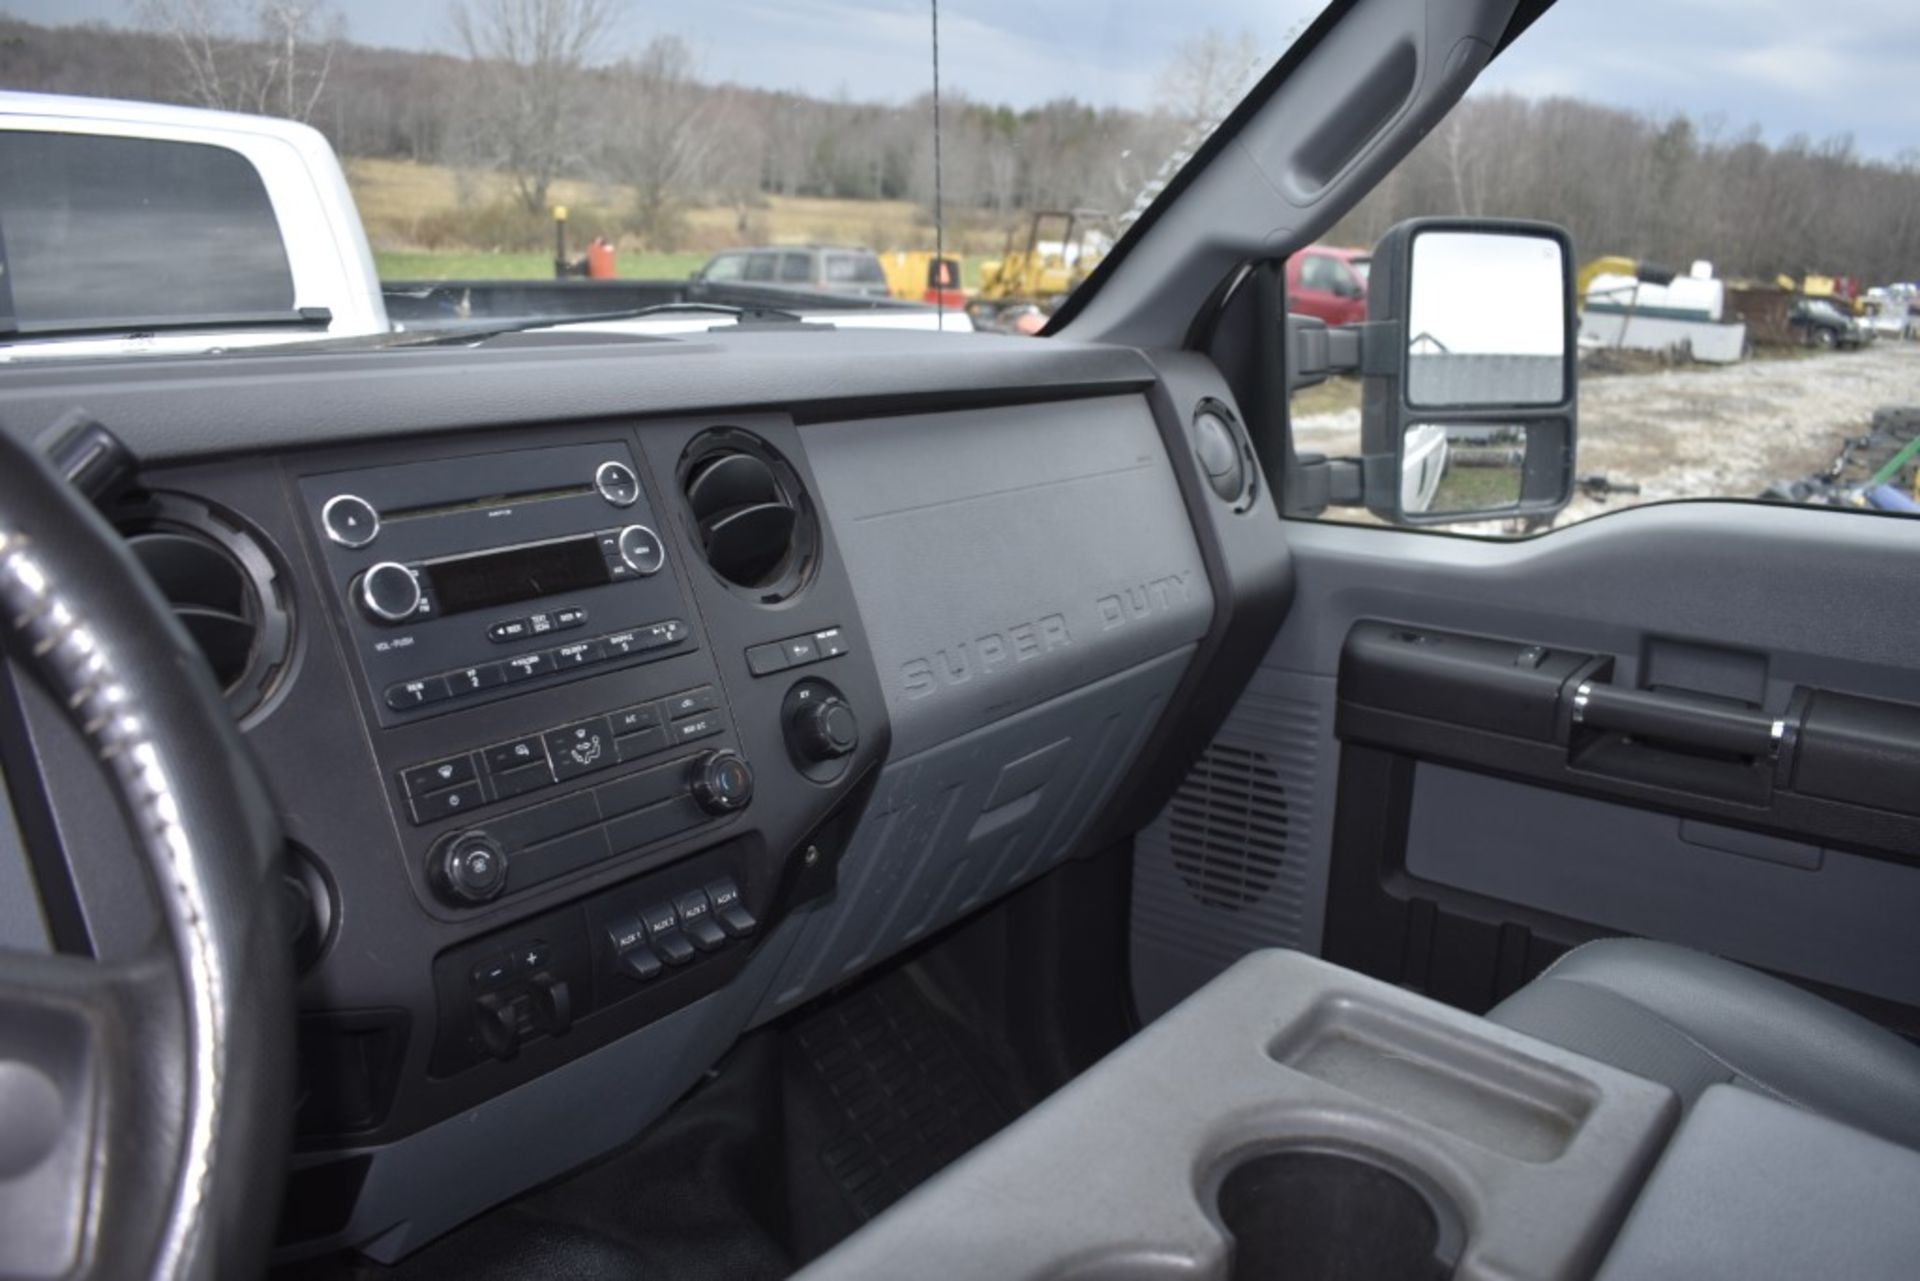 2011 Ford F-250 Super Duty Truck - Image 38 of 40